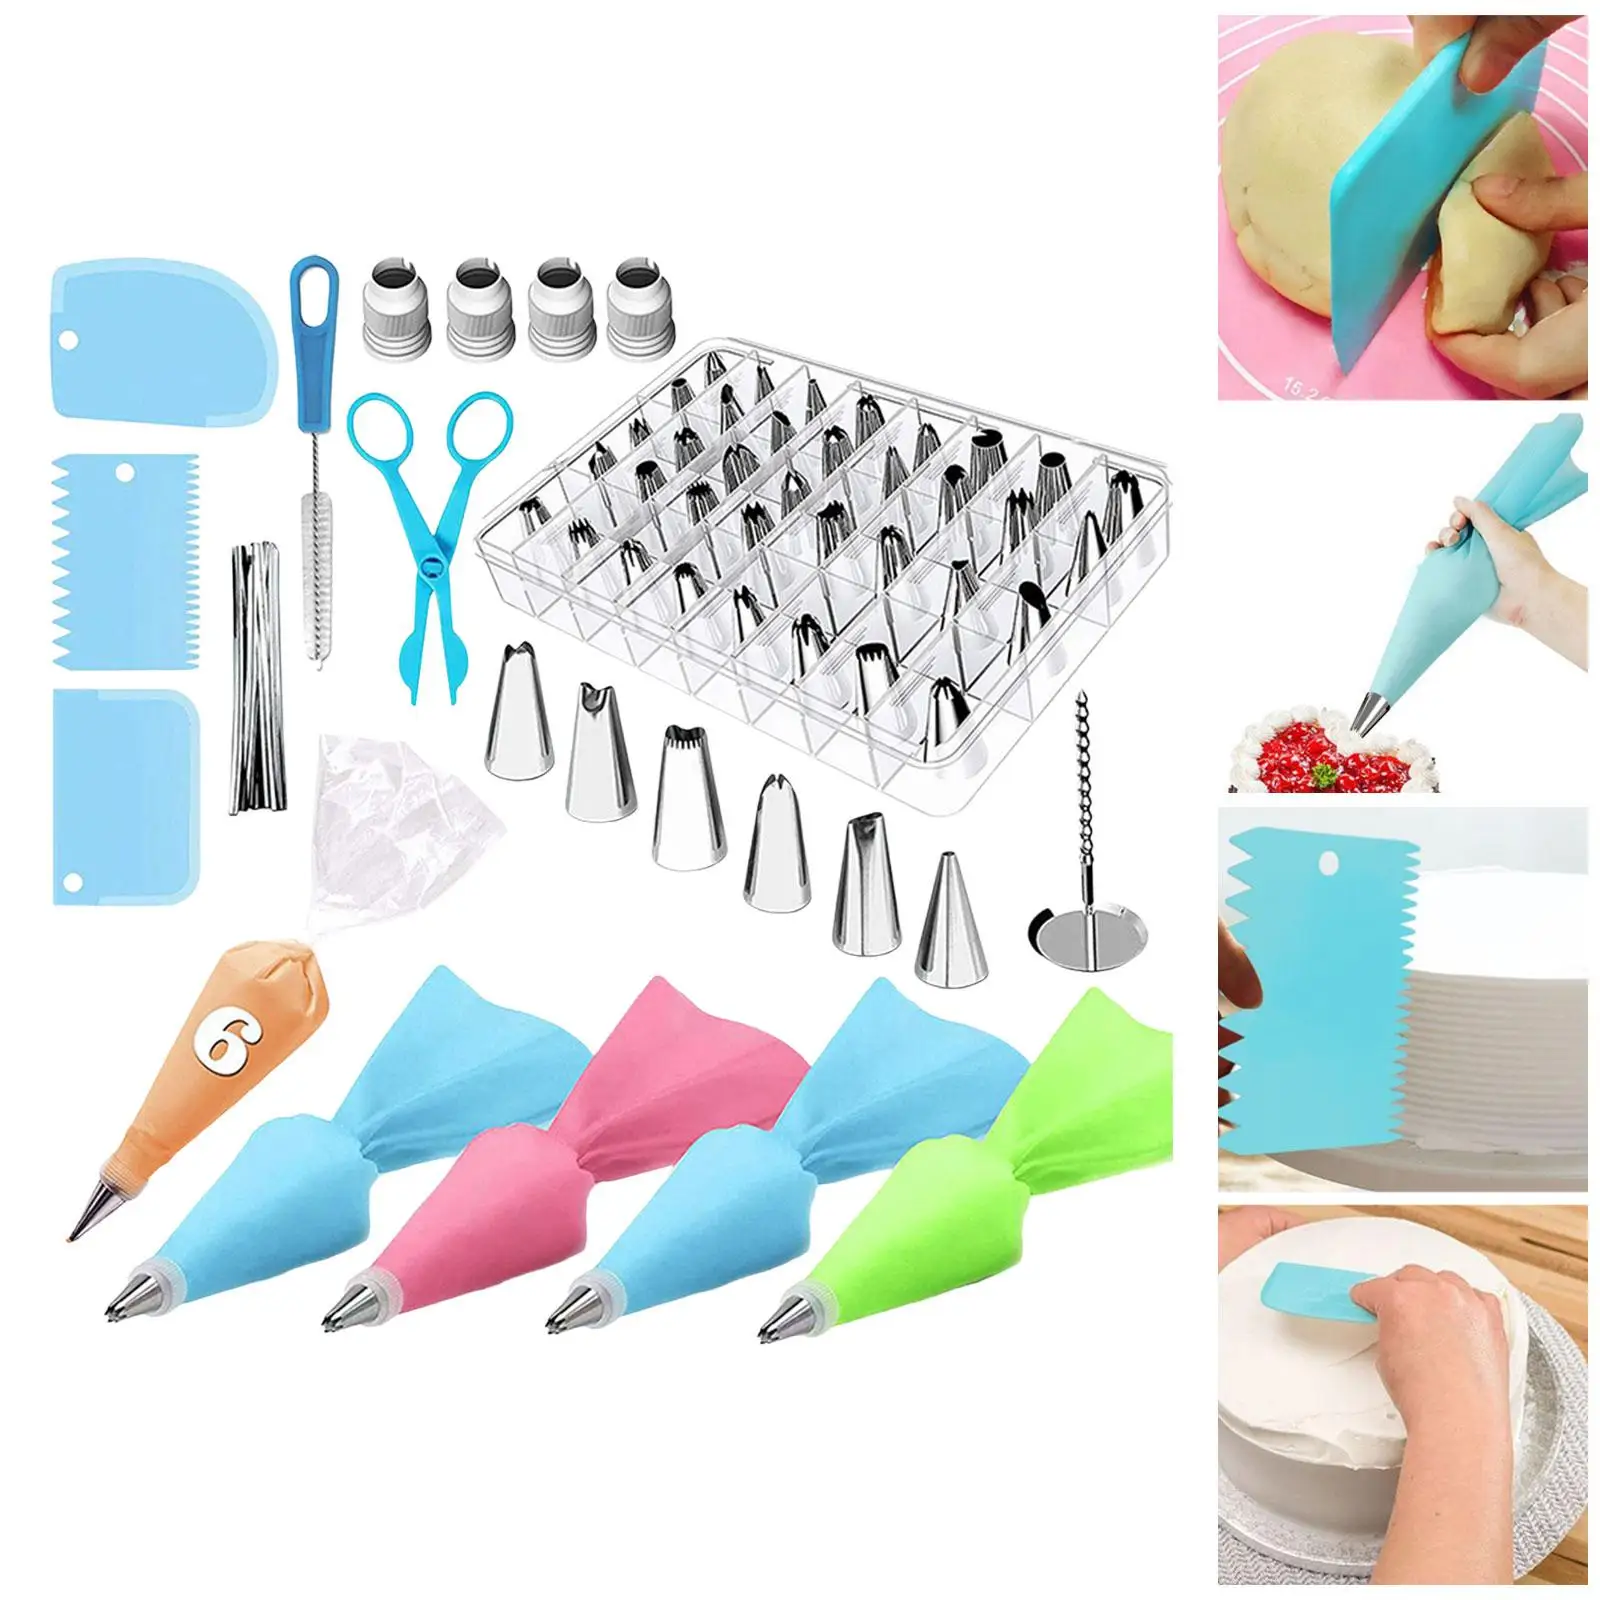 72x Cake Decorating Supplies Cookie Icing Cakes Cupcakes Baking Pastry Tools Cake Cream Frosting Tool Piping Bags and Tips Set